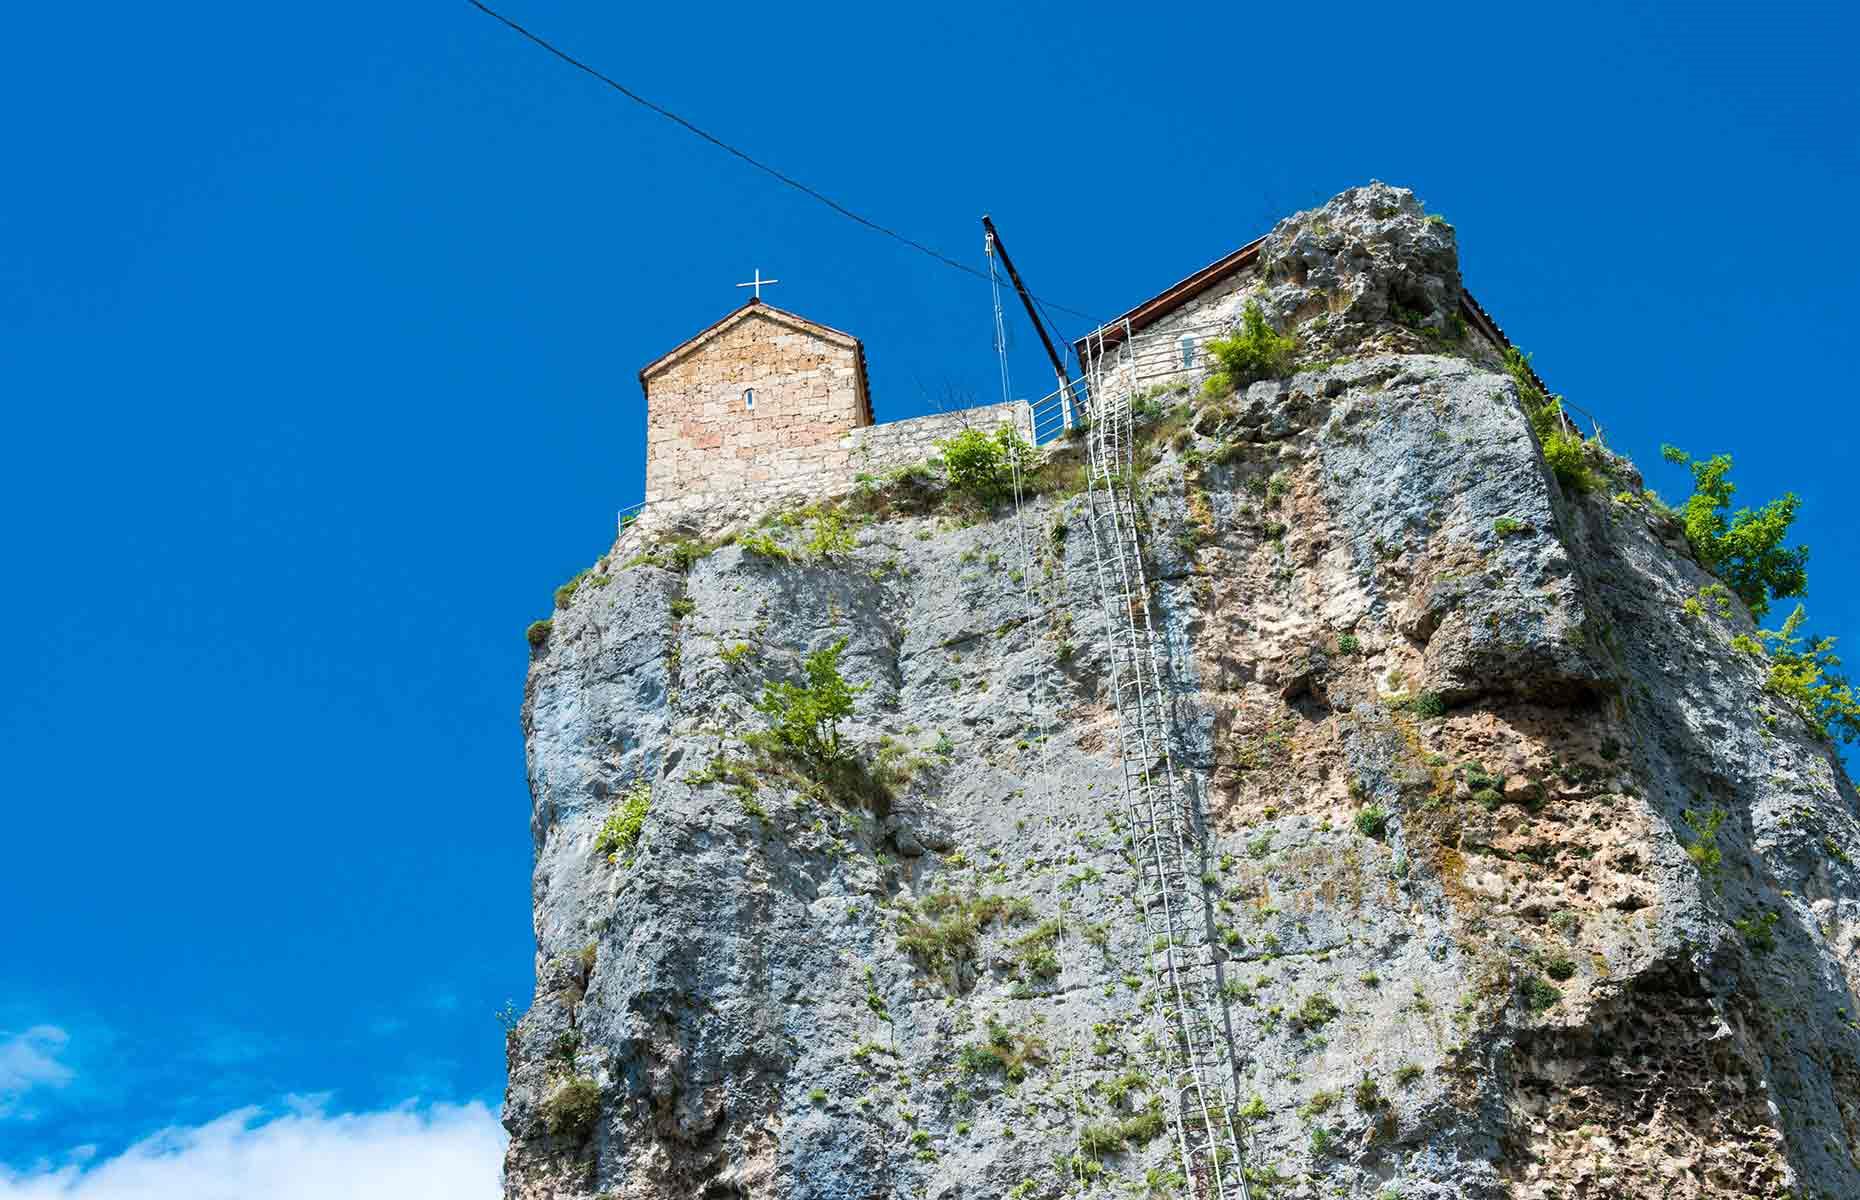 <p>Each day, monks living in the complex below would make the vertical climb up the pillar to the church to say prayers. Pictured here, the journey wasn't for the faint of heart. </p>  <p>Accommodation at the top of the pillar was kept modest and pared-back as a sign of devotion – Maxime, along with priests and monastery guests, would've broken bread in a simple dining space with bare plaster walls. </p>